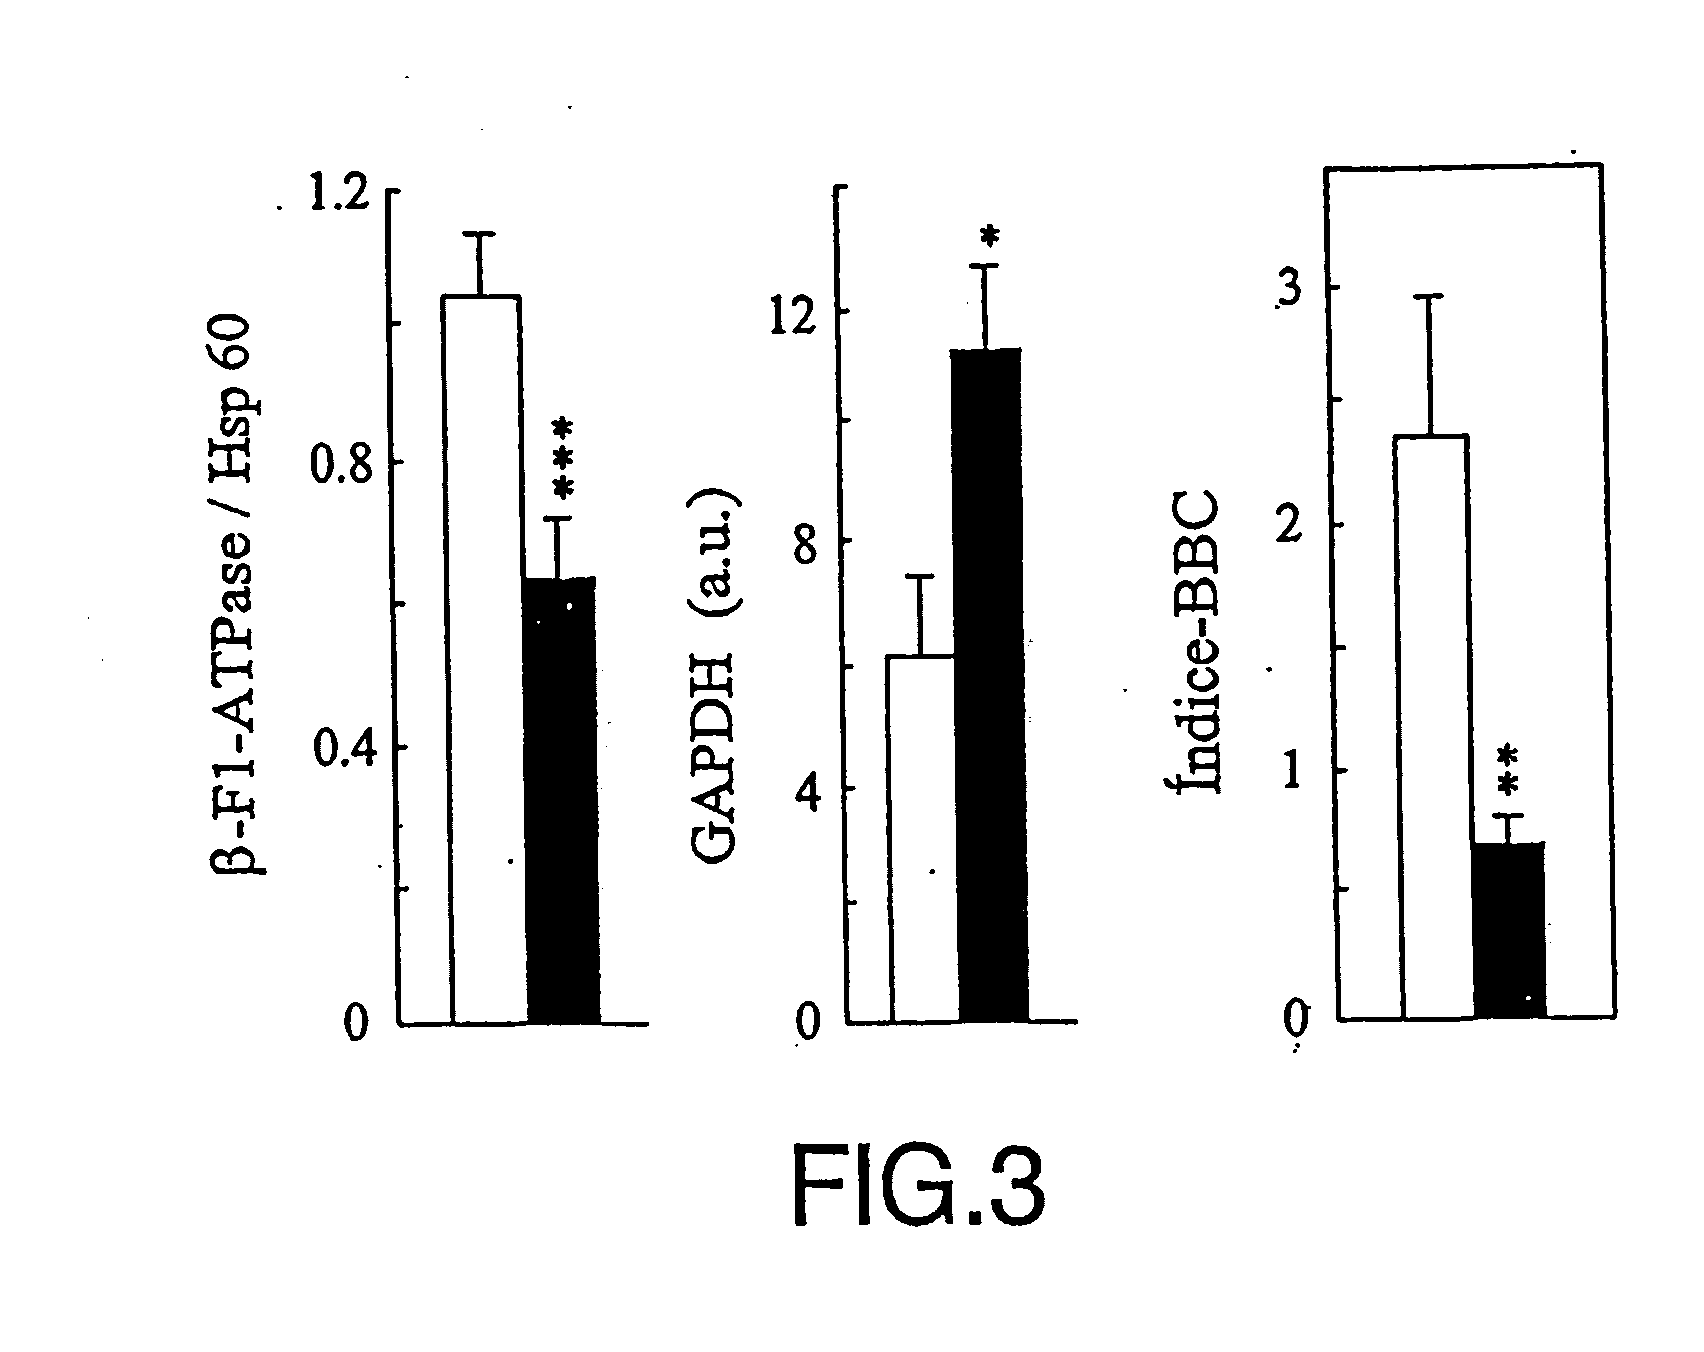 Method for cancer detection, progression analysis and malign tumour prognosis based on the study of metabolic markers of the cell